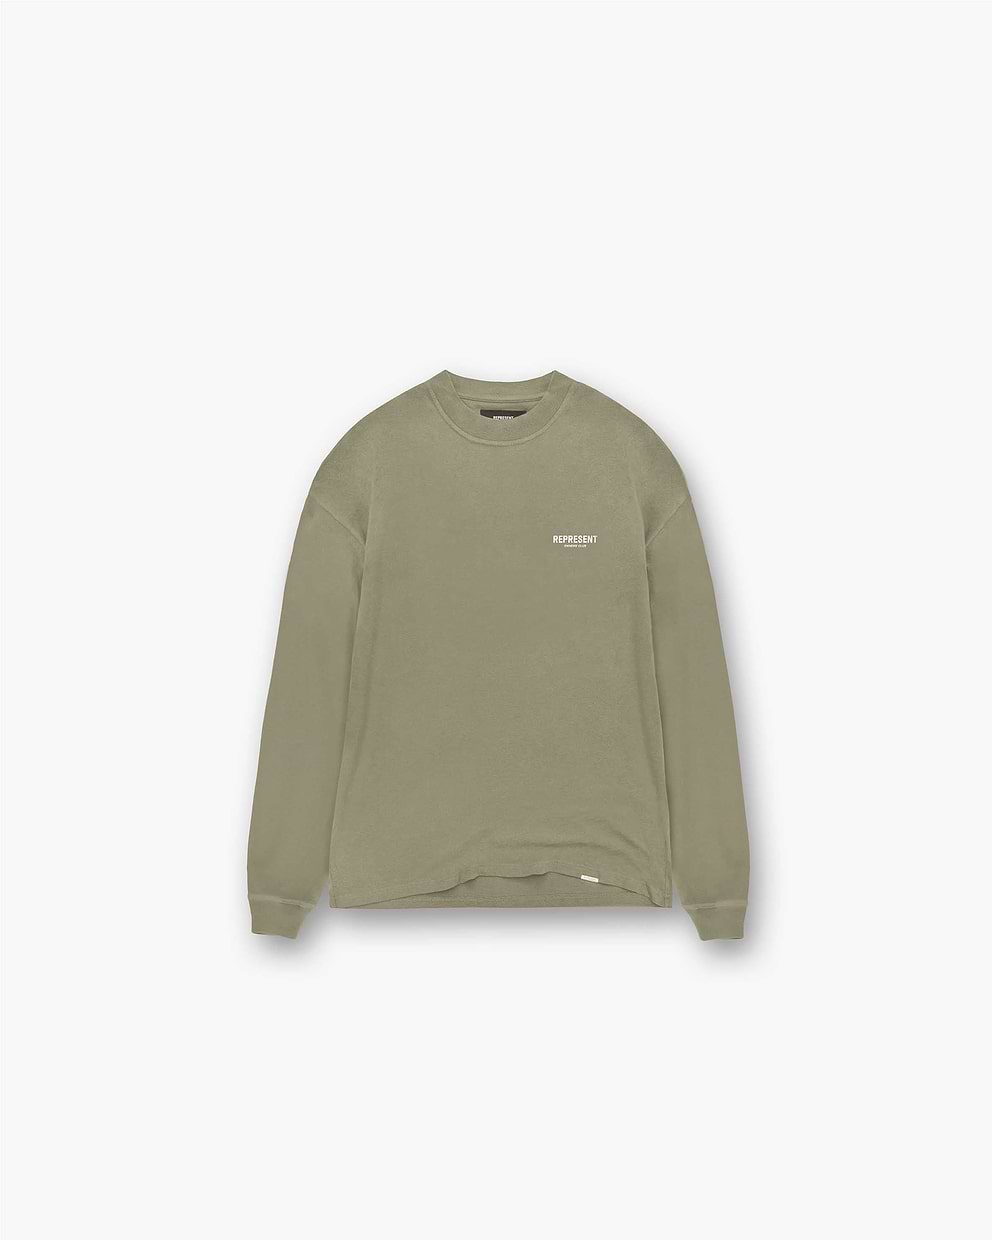 Represent Owners Club Long Sleeve T-Shirt - Olive